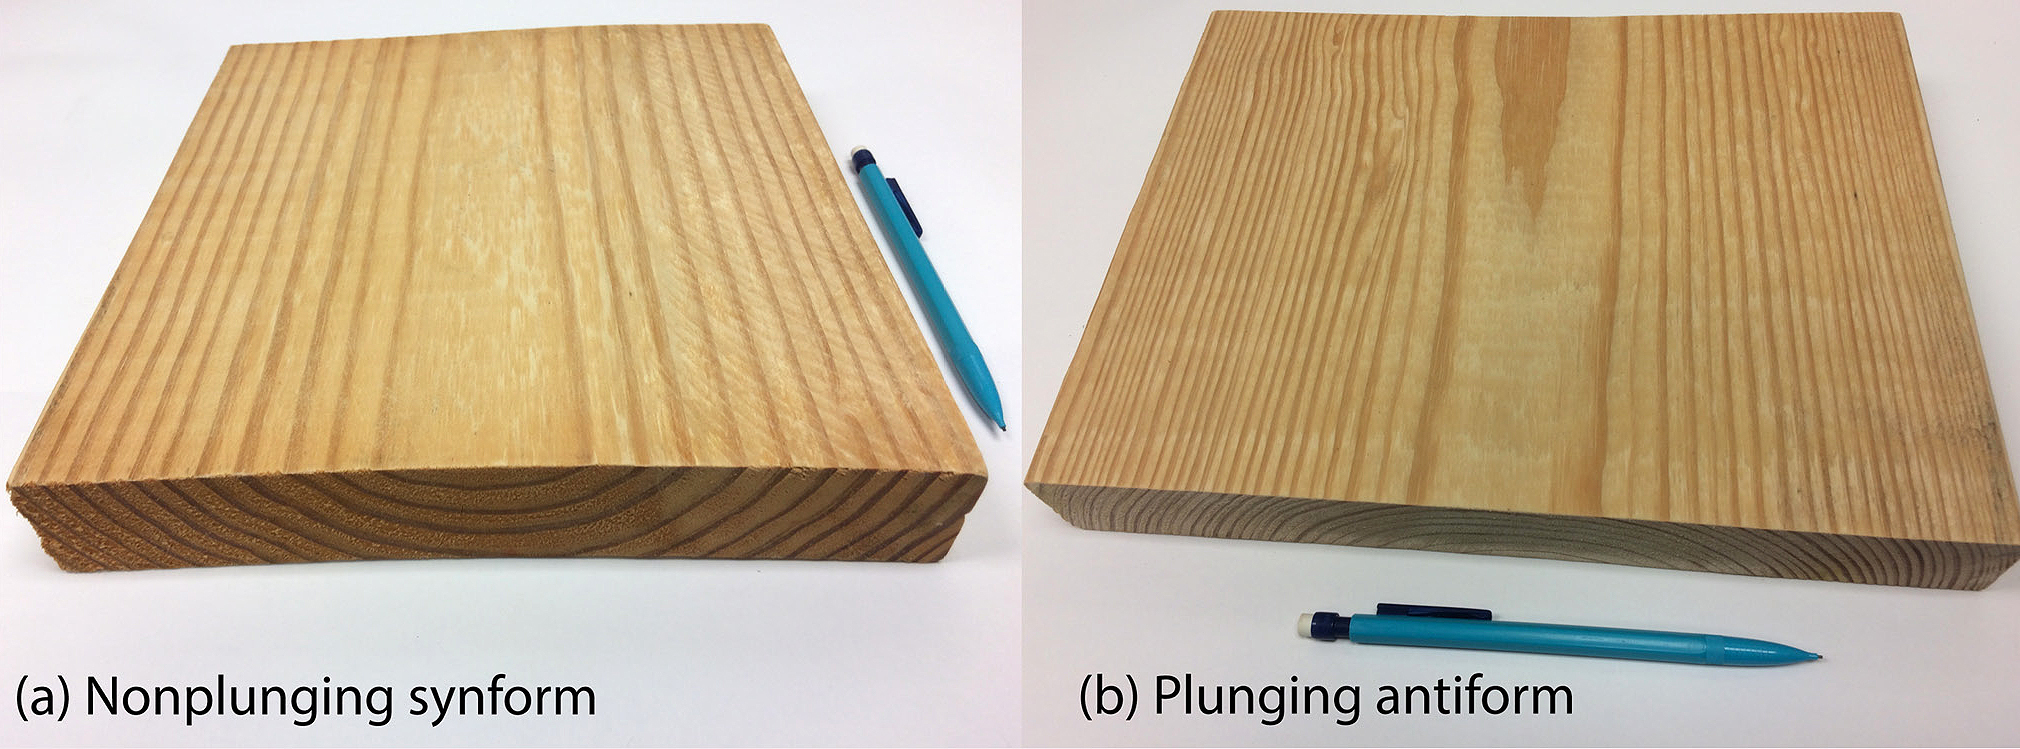 Figure 2 Images illustrating nonplunging syncline and plunging anticline. Note. (a) Growth rings form downward-closing folds called synforms. The two growth rings on either side of a fold hinge are parallel to form a nonplunging synforms. (b) Antiforms are produced where growth rings form upward-closing folds where the two growth rings are plunging to form a plunging antiform.